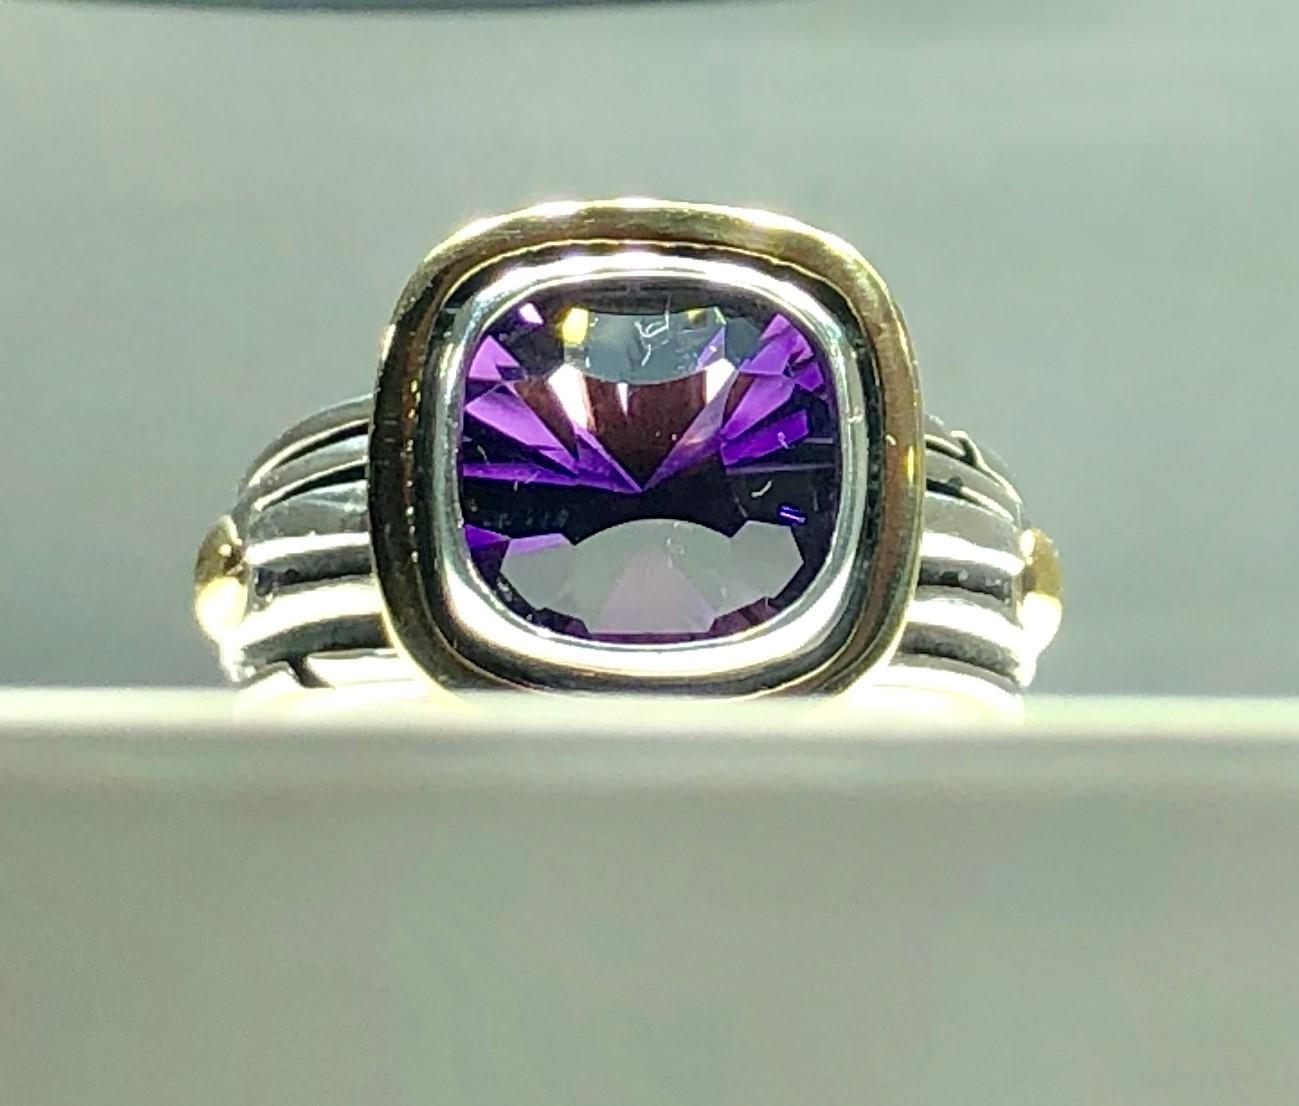 John Atencio 18 karat Sterling Amethyst cocktail ring. John Atencio design created in 18 karat and sterling, weighs10.5 grams. Amethyst center stone measures 9mm by 9.22 mm, cushion fancy cut. Ring size 7, ring can be sized in house upon purchase